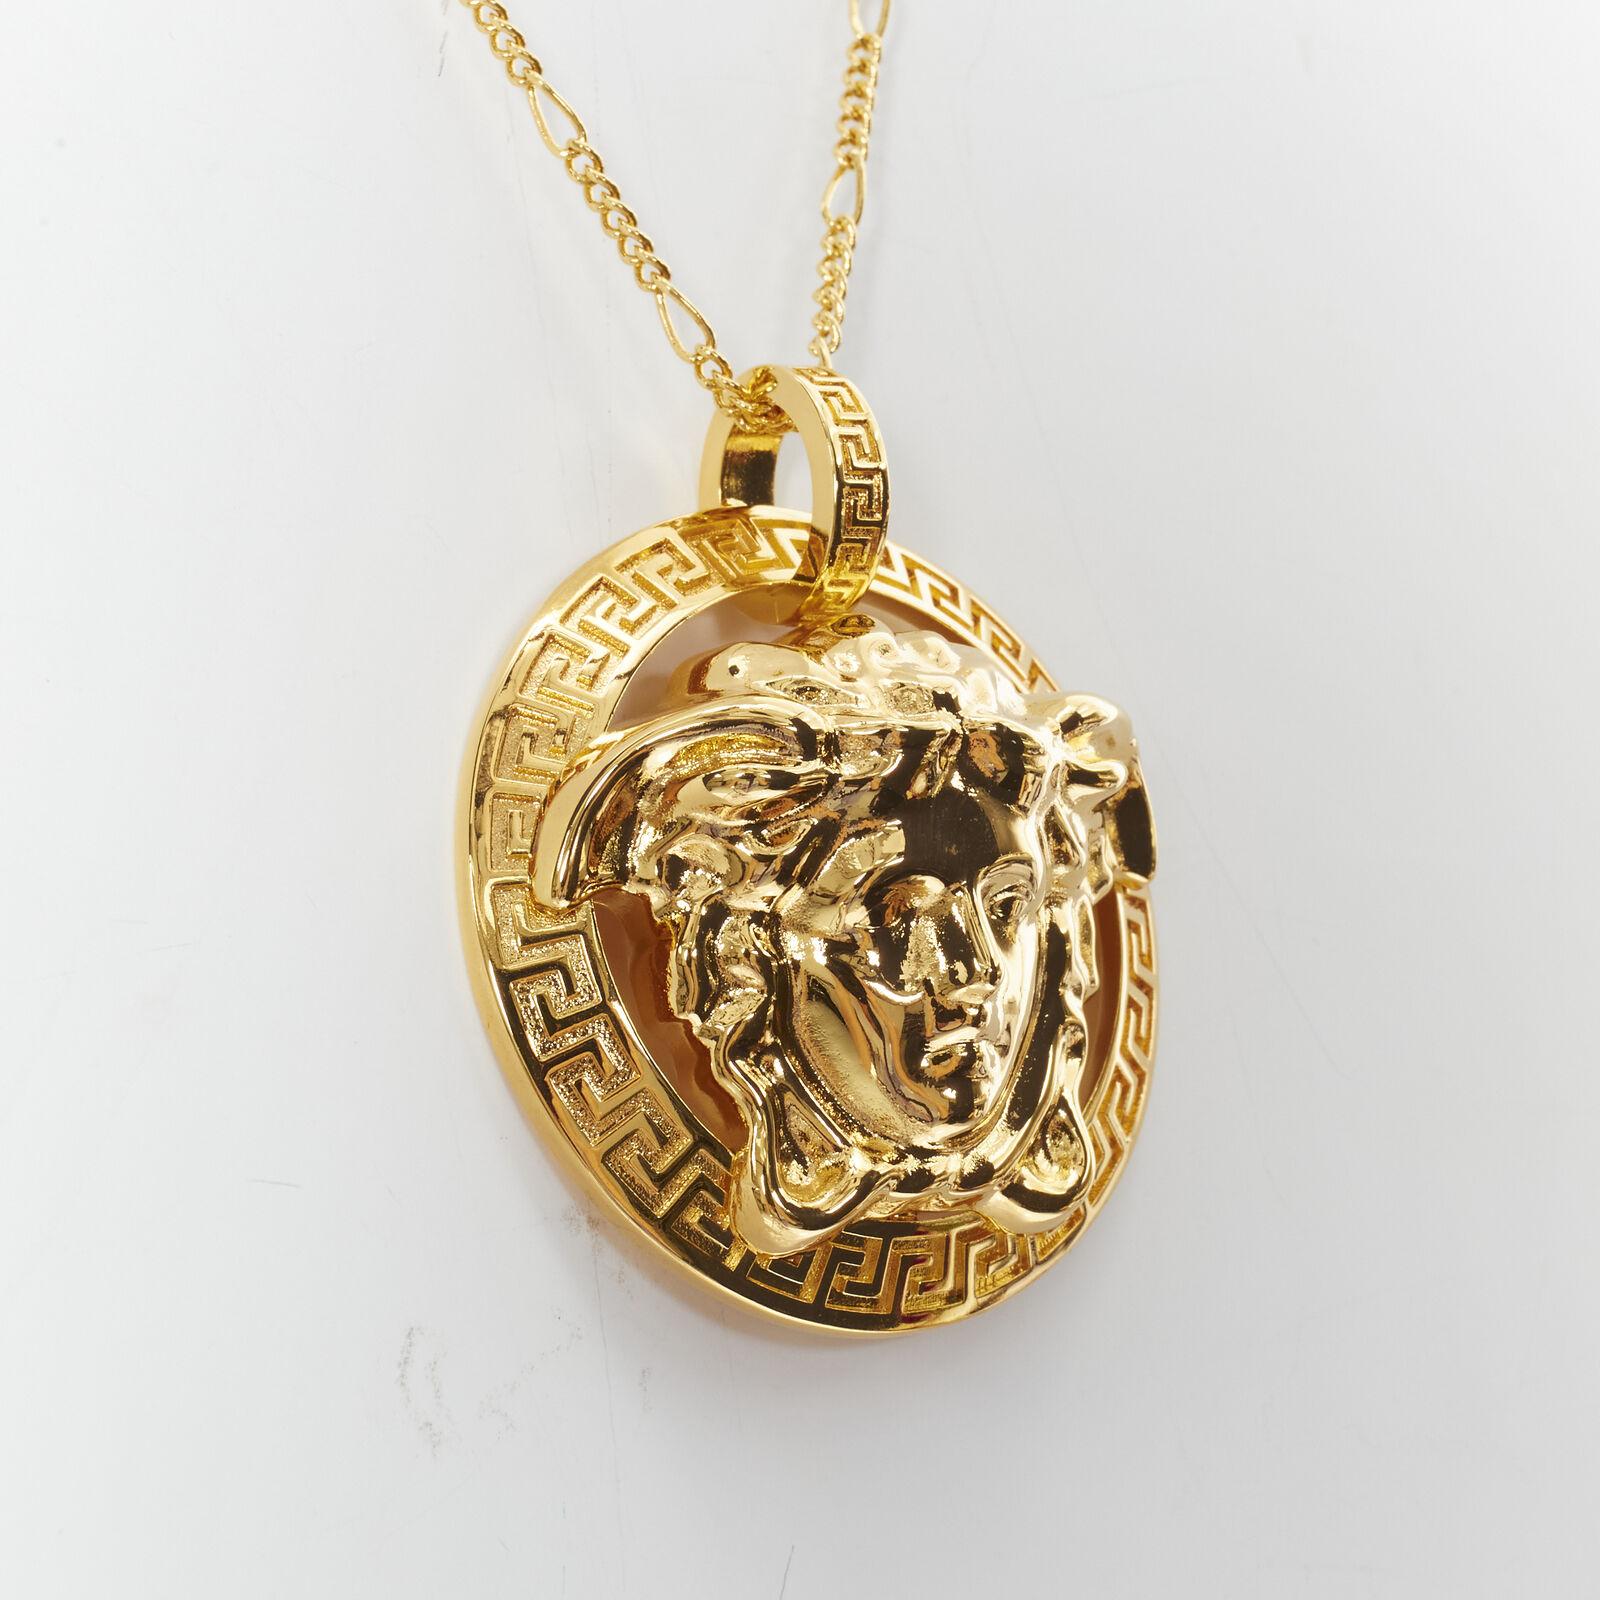 new VERSACE Medusa Greca coin medallion gold tone nickel short necklace
Reference: TGAS/B01127
Brand: Versace
Designer: Donatella Versace
Material: Nickel
Color: Gold
Pattern: Solid
Closure: Clasp
Extra Details: Oversized 3D Medusa head with Greca